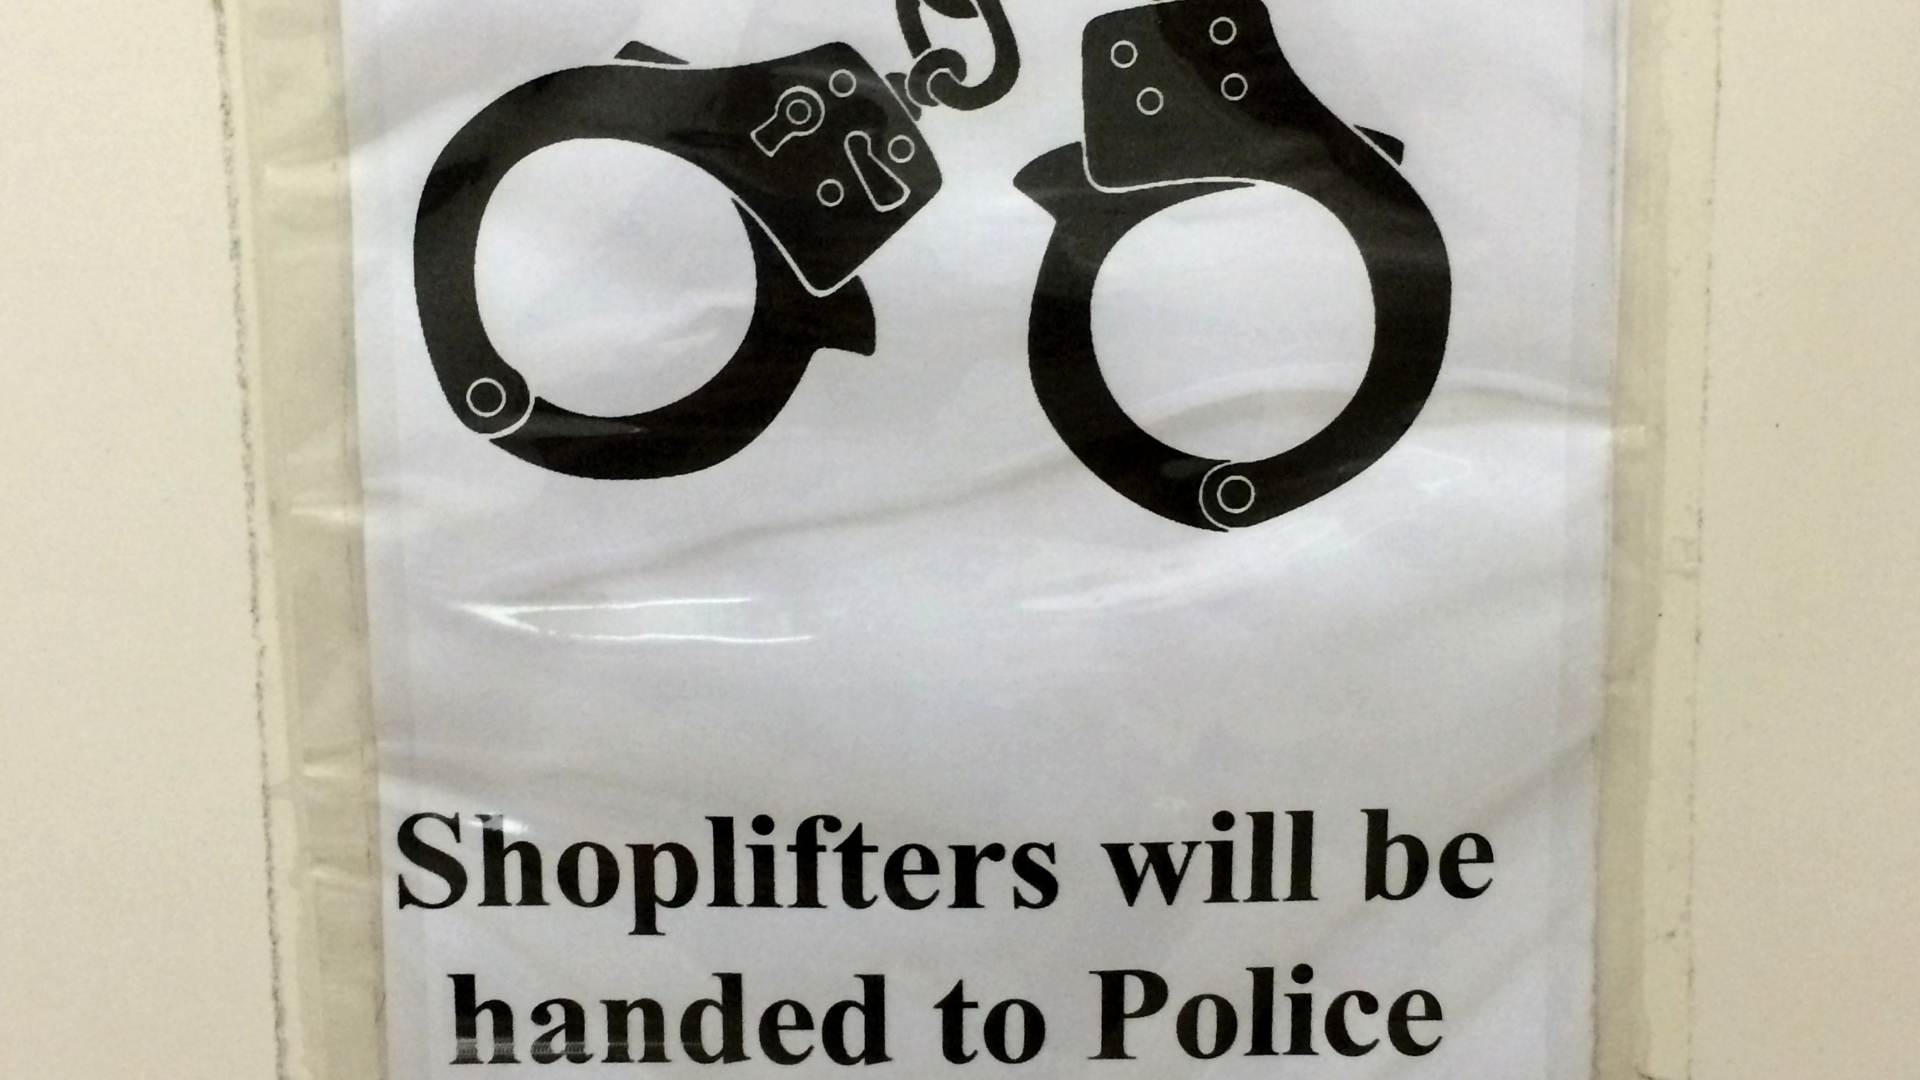 A shop lifting sign featuring a pair of handcuffs.